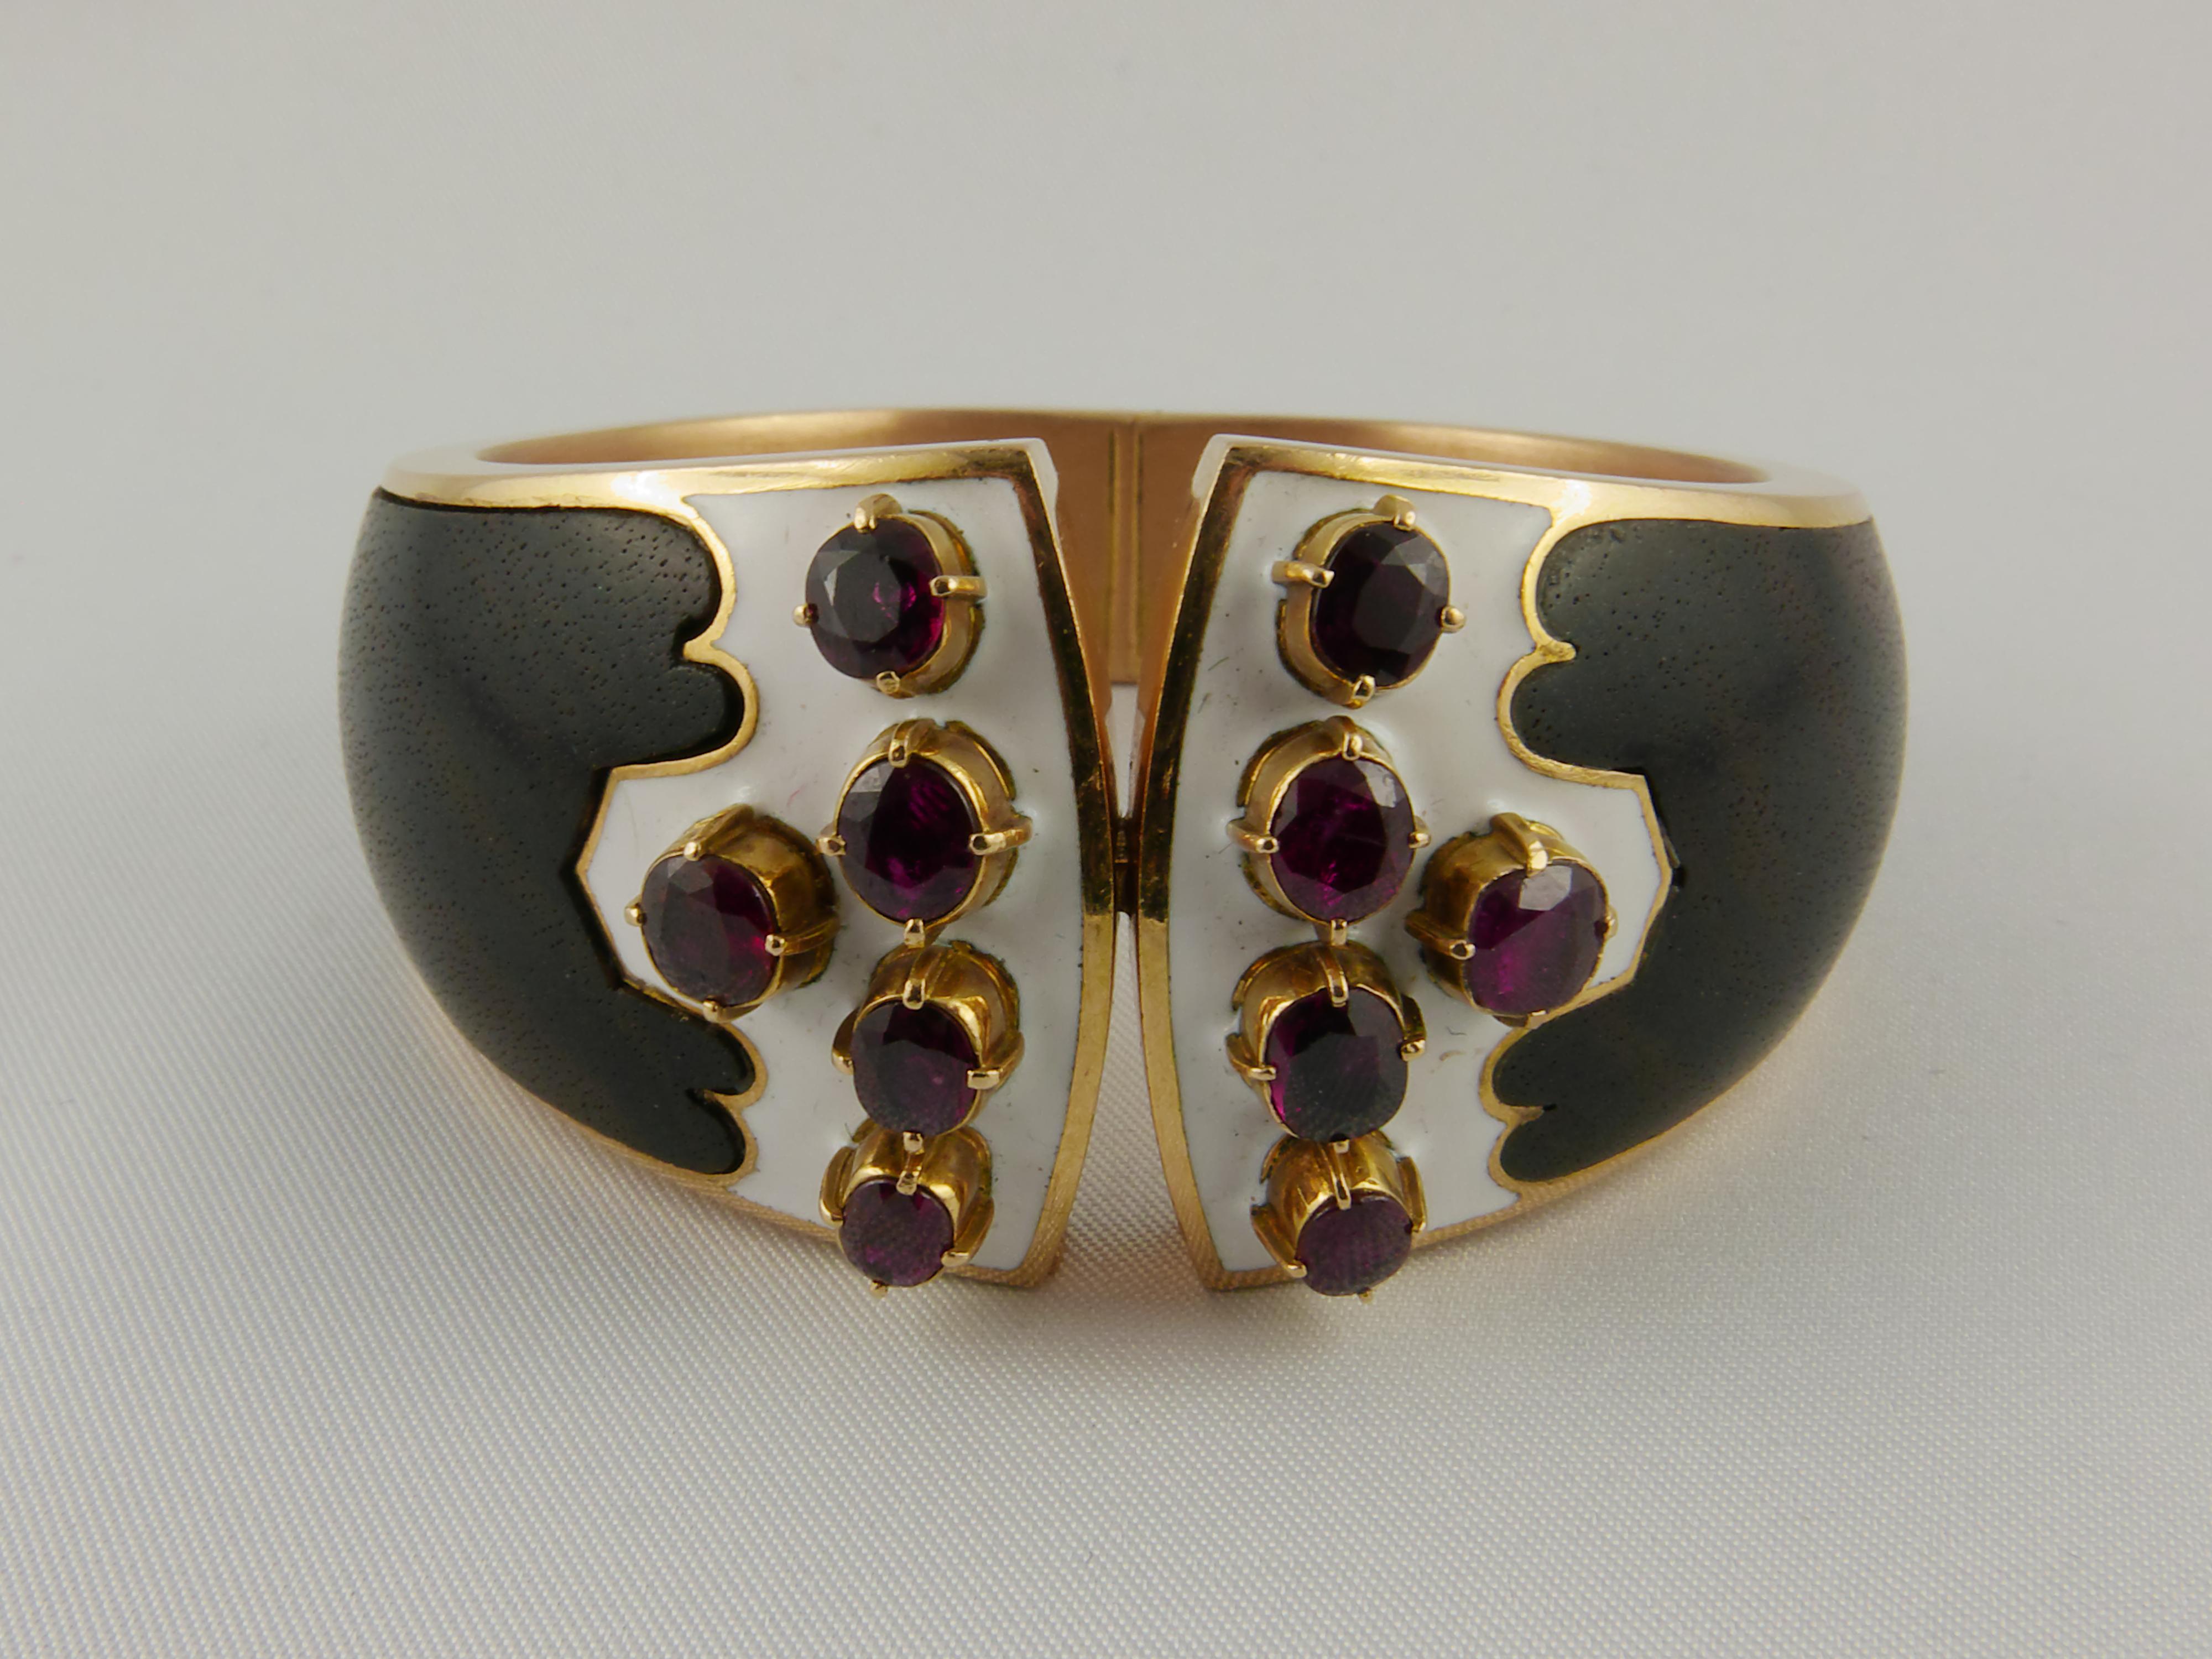 Glamourous 1970S Paul Binder Wood and Enamel cuff bracelet, accented by 2.50 cts approx oval-shaped Rubies  set in 18k Yellow Gold mounts. This unconventional, eye-catching bracelet is comfortably wearable for all occasions. Paul Binder opened his